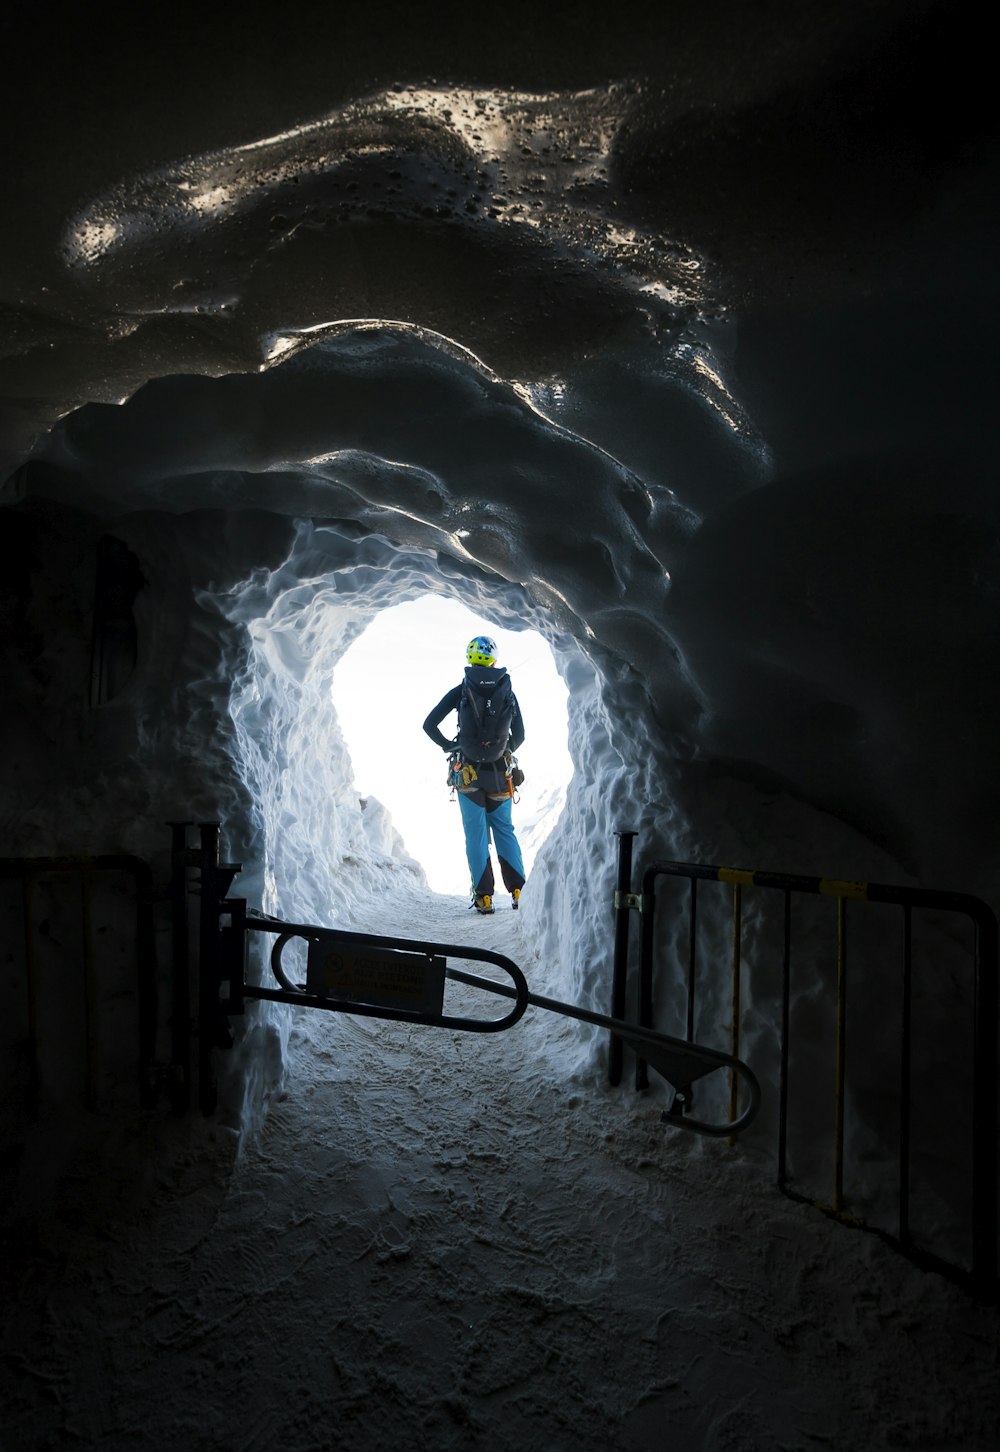 Know More About The Caving Jobs